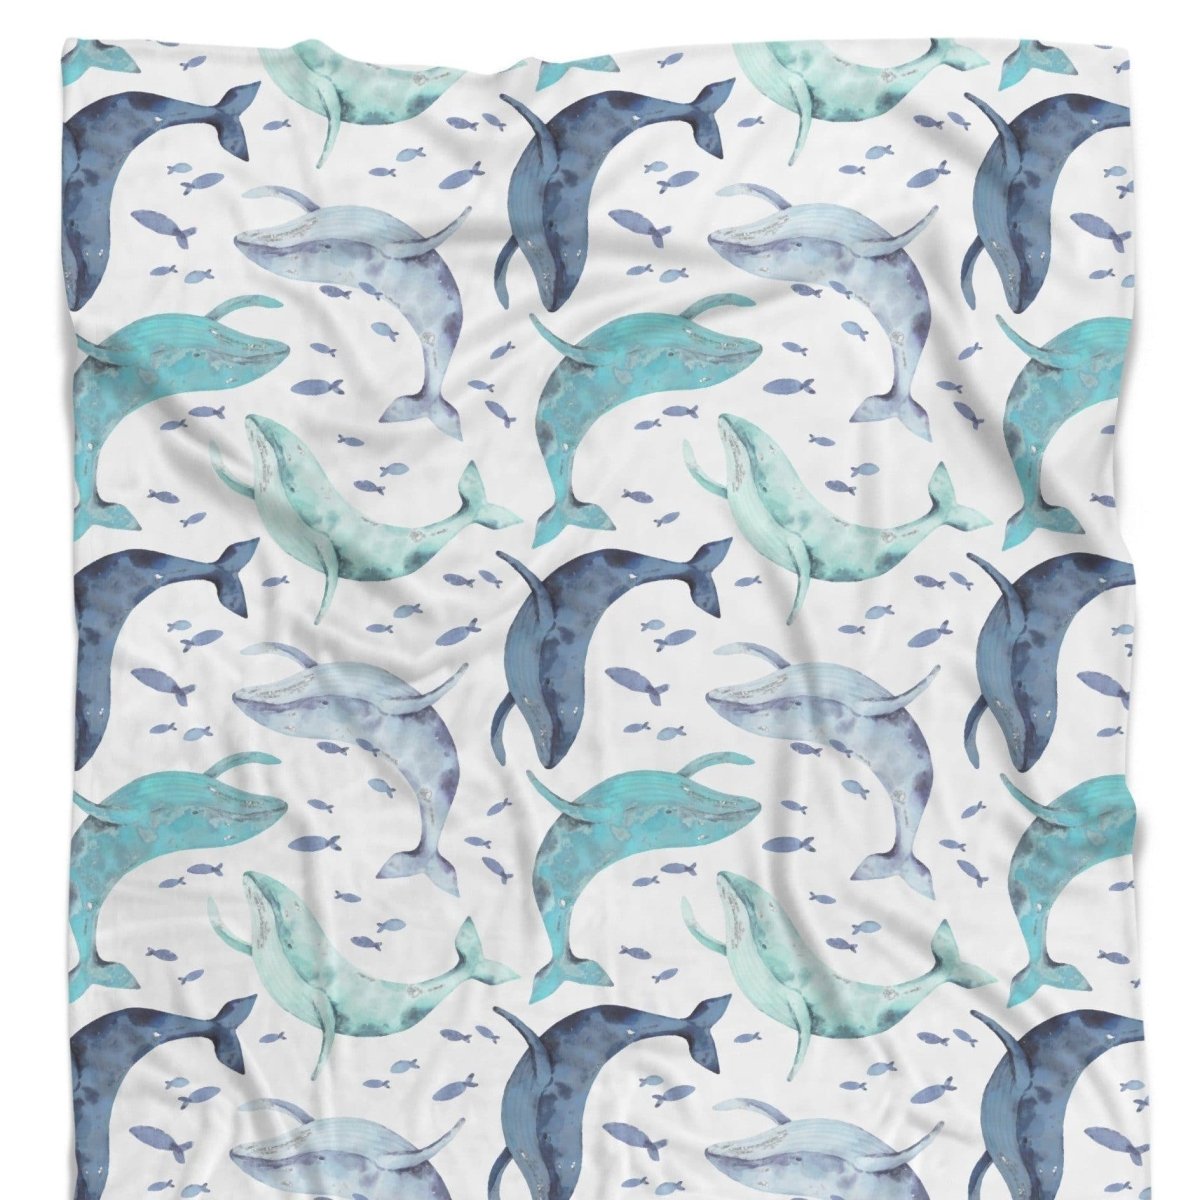 Oh Whale! Minky Blanket - gender_boy, gender_neutral, Oh Whale!